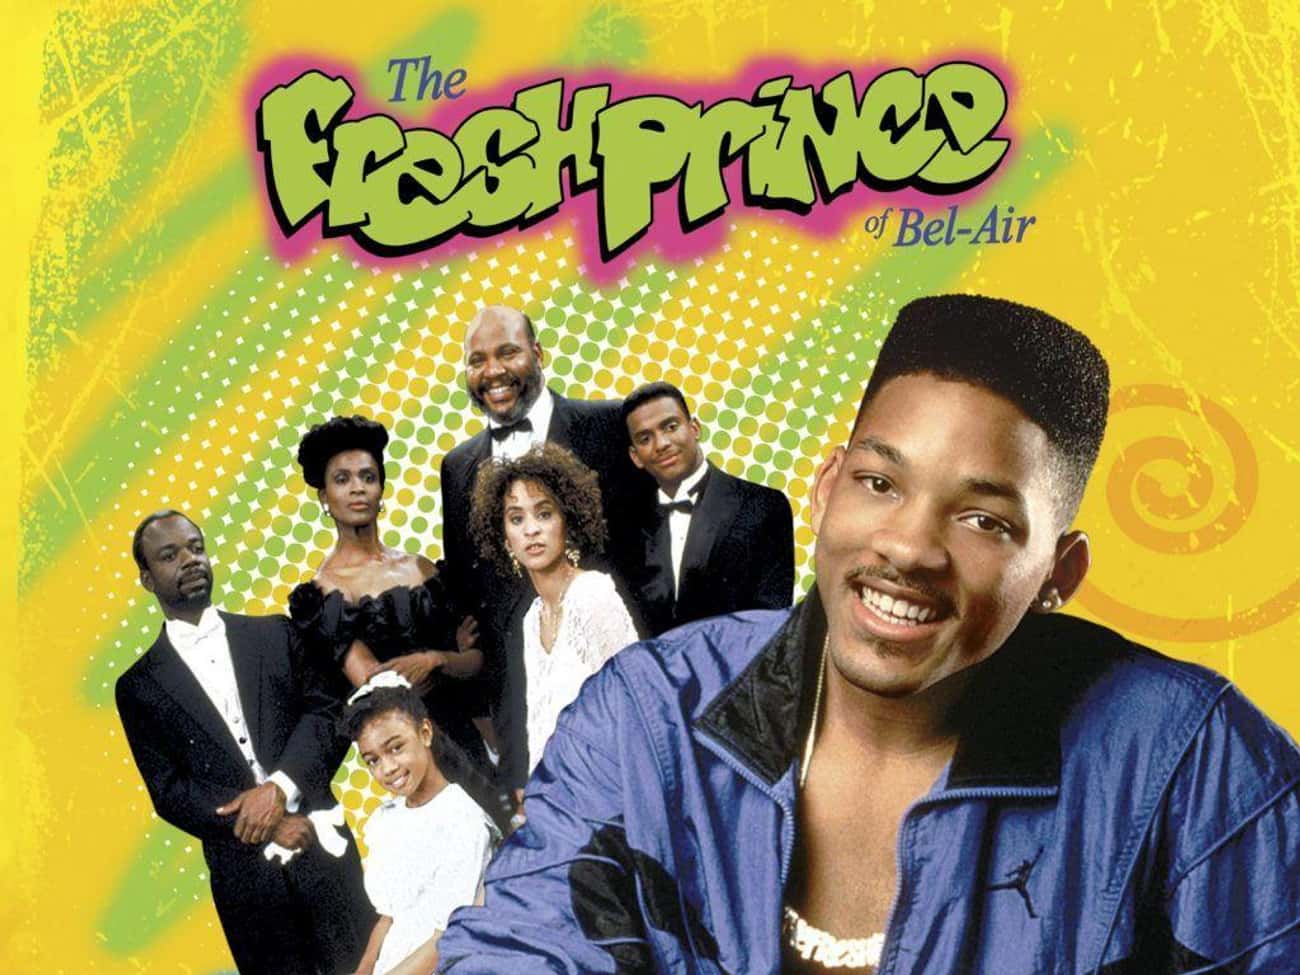 The Fresh Prince of Bel-Air - THEN